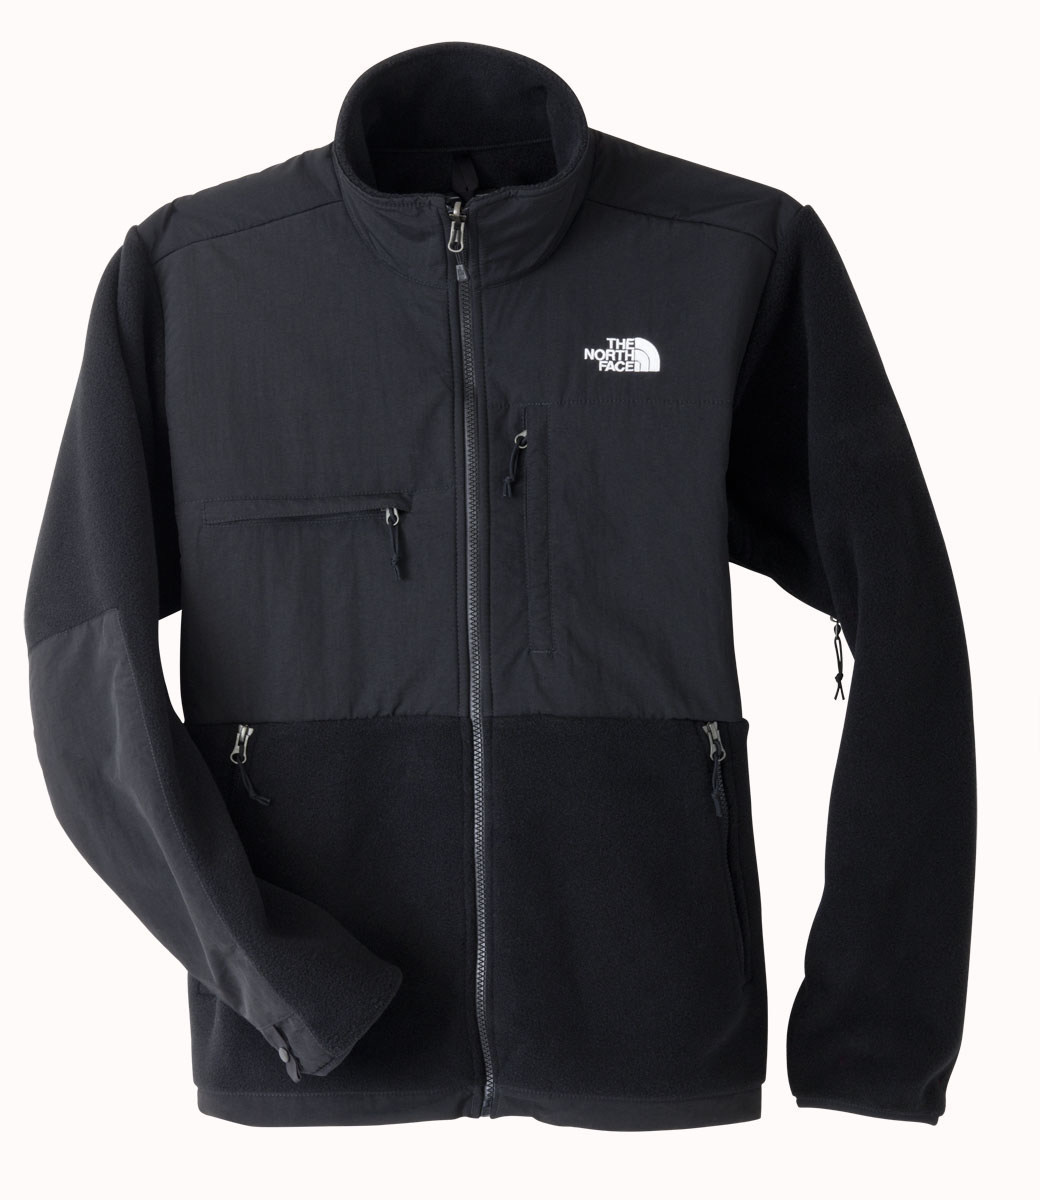 The North Face Denali jacket made with Unifi Repreve recycled polyester. © The North Face